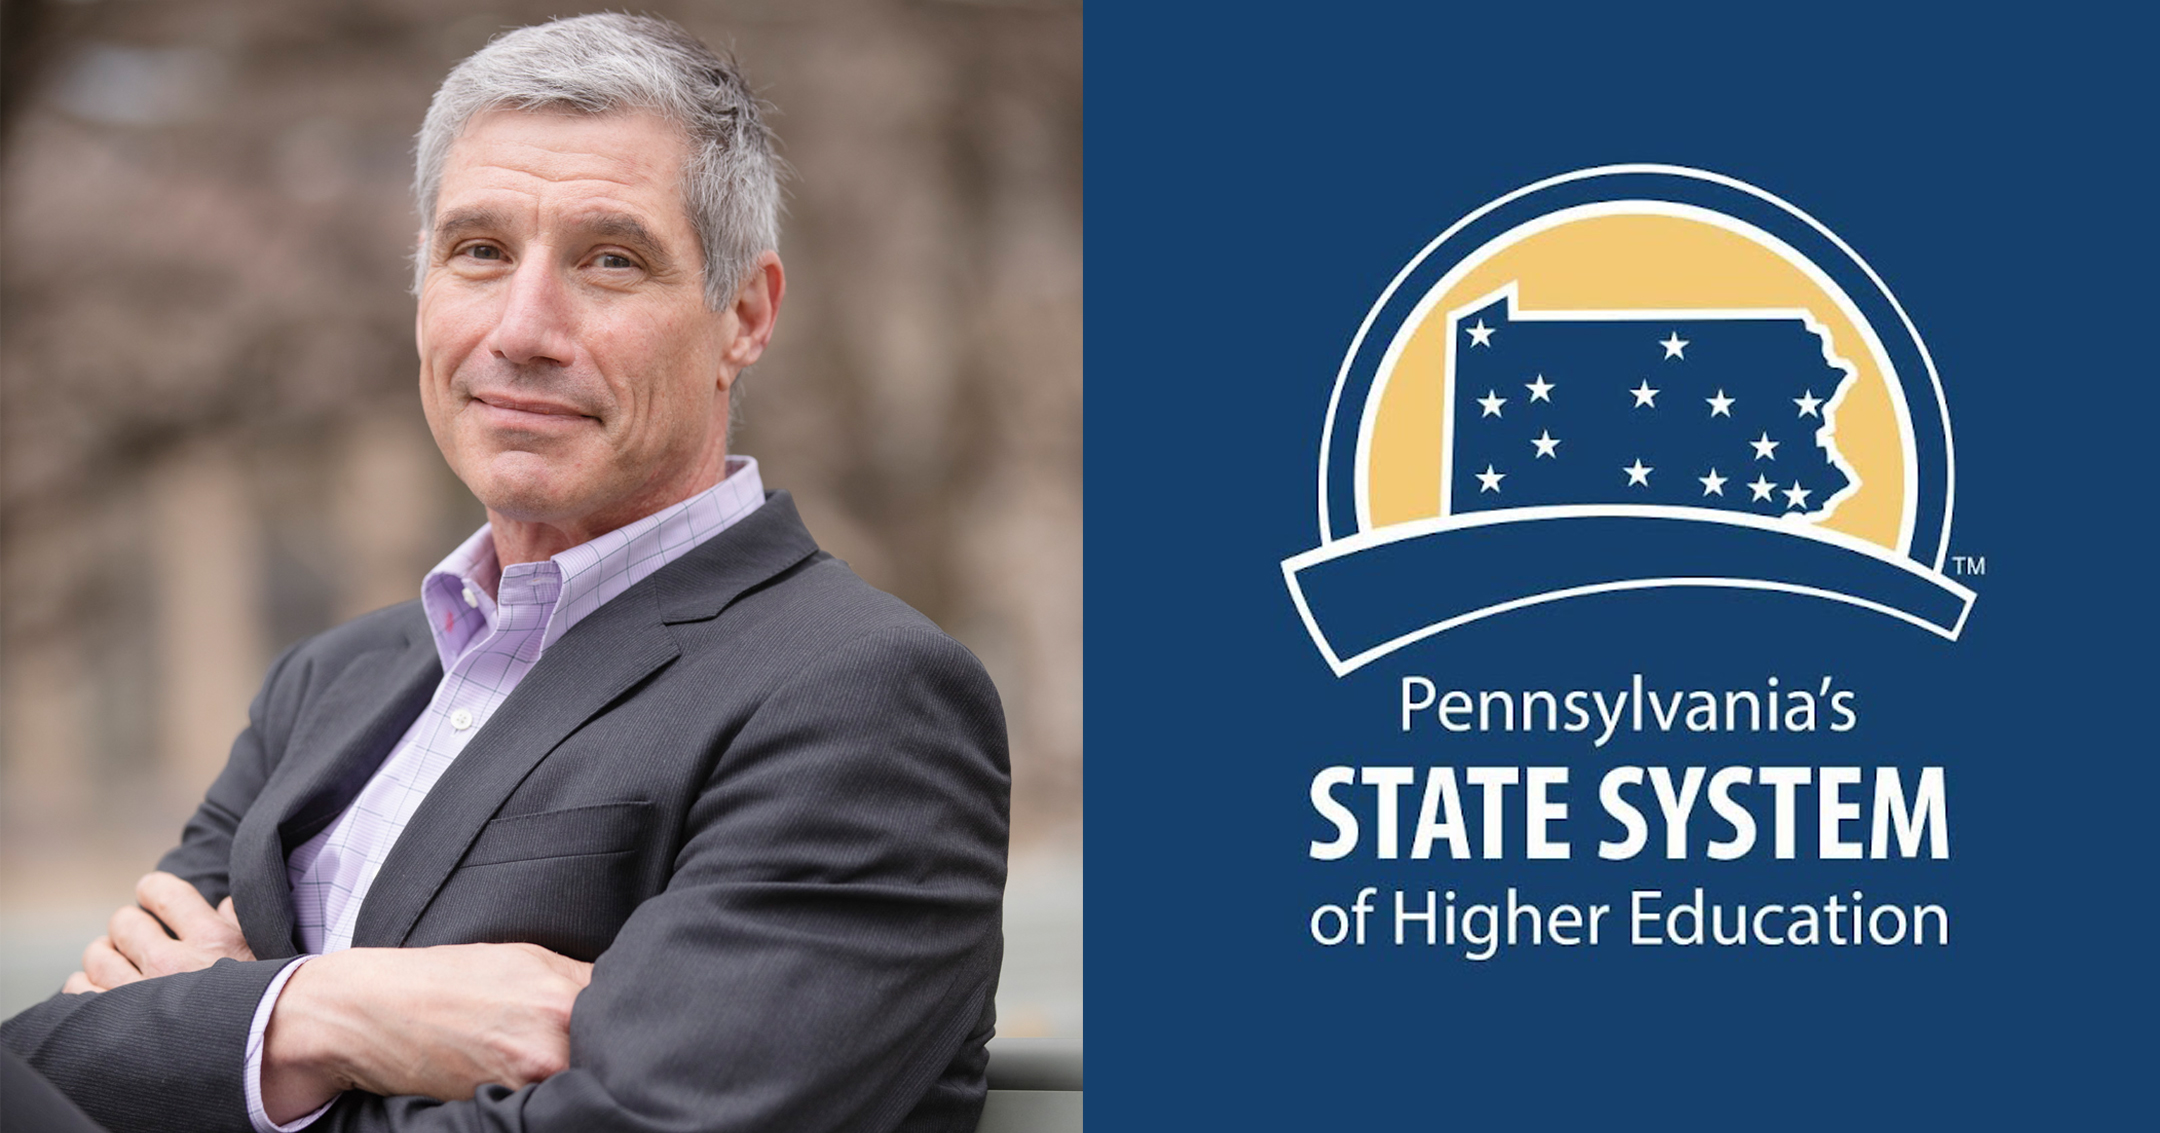 Headshot photo of Dan Greenstein with his arms folded, on the left, and the logo of Pennsylvania's State System of Higher Education, on the right